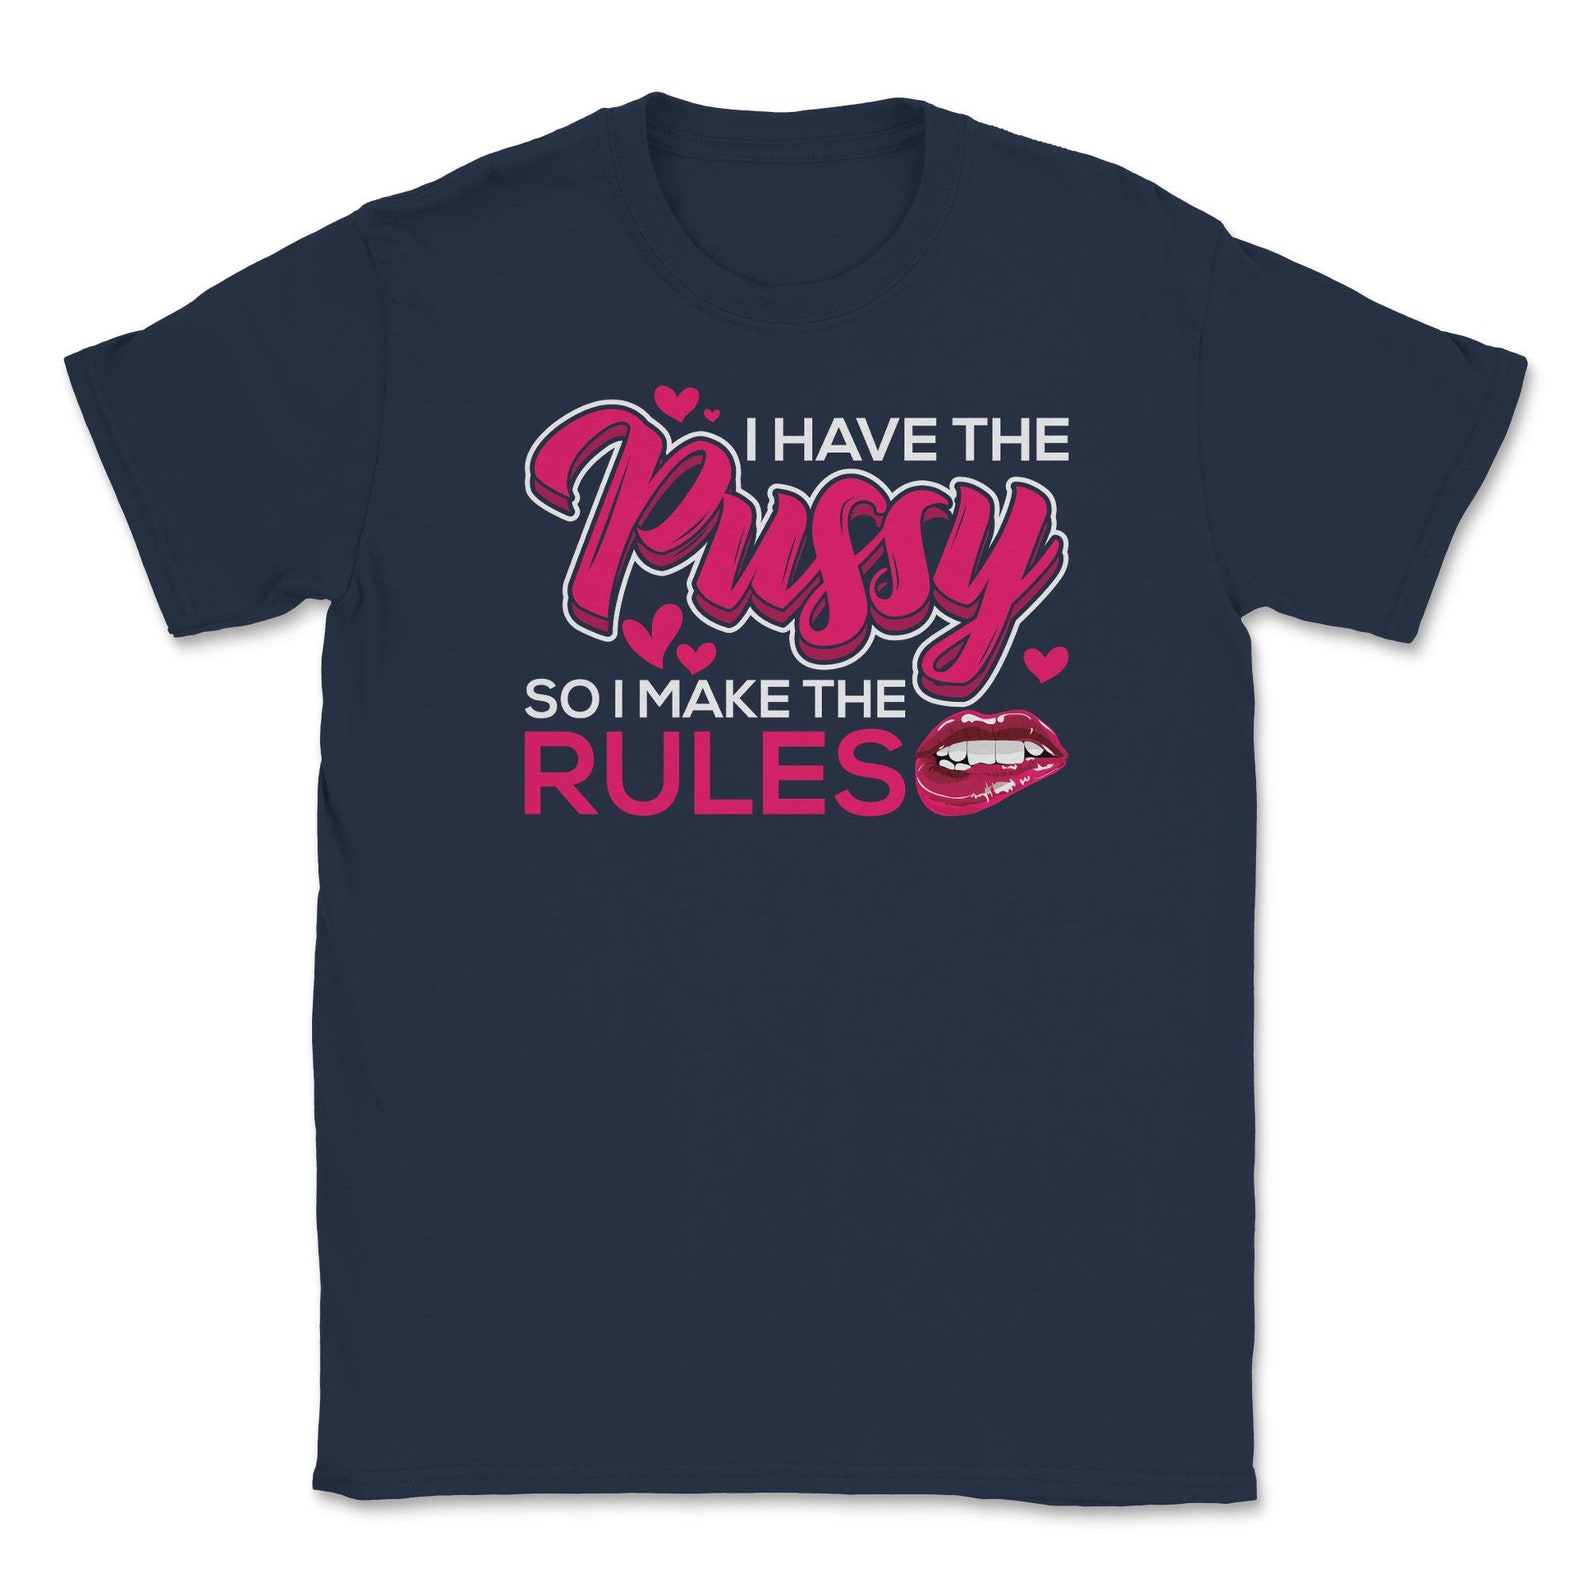 I Have The Pussy So I Make Rules Naughty Adult Humor Sarcastic Etsy 